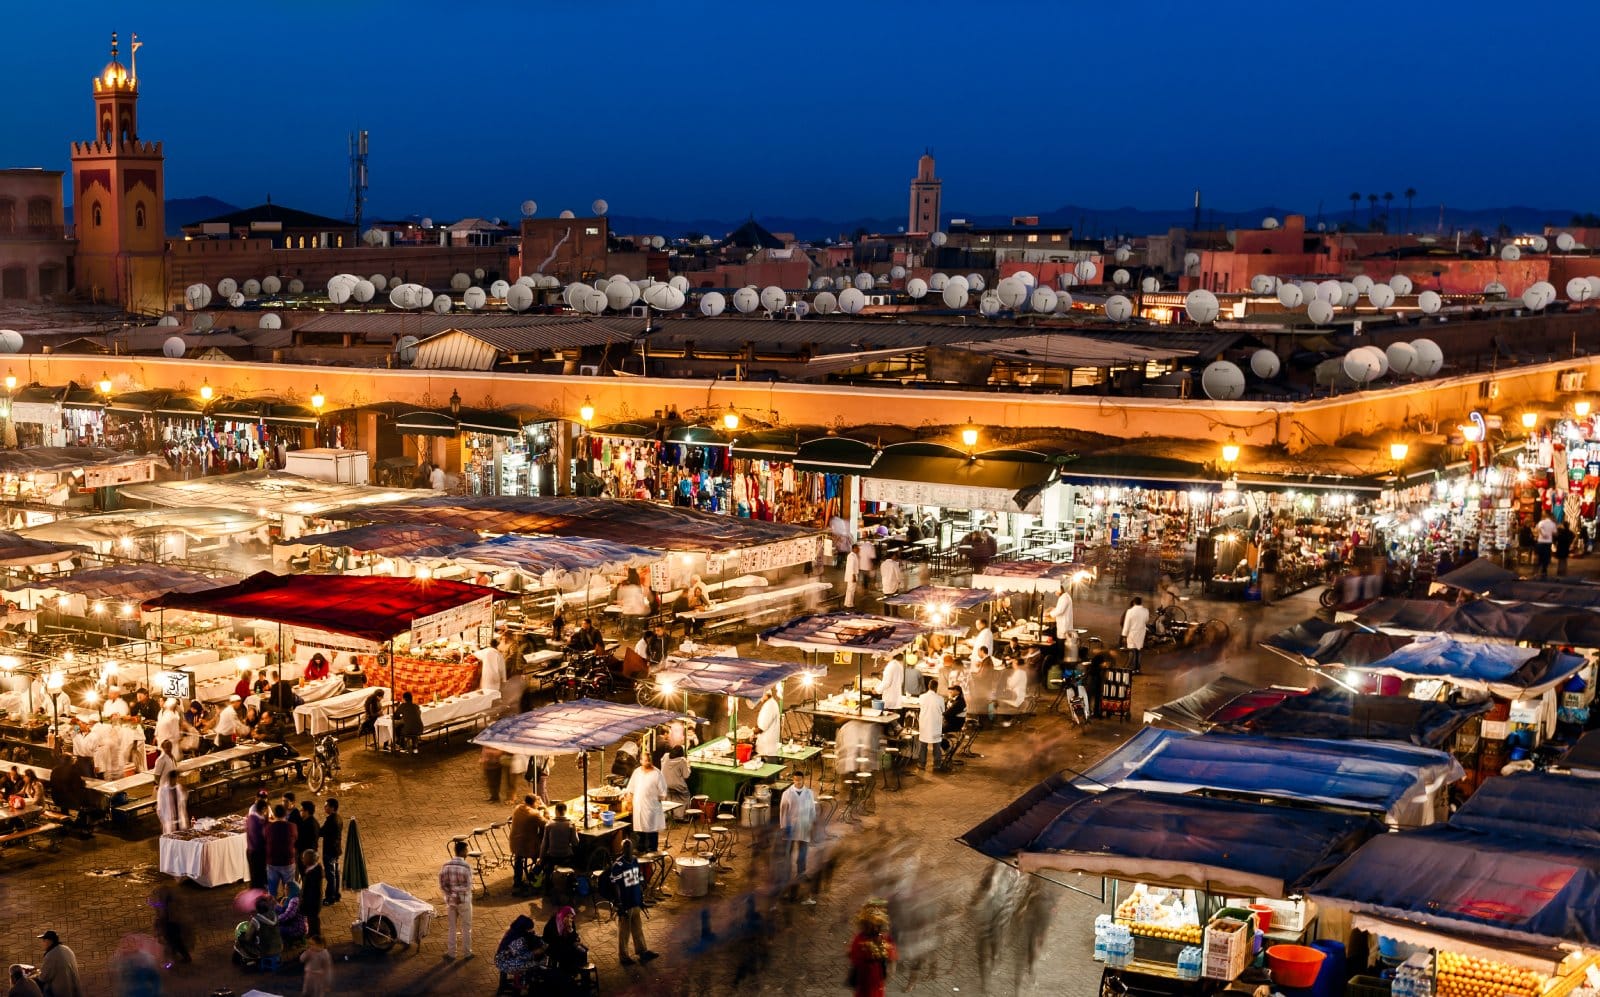 <p class="wp-caption-text">Image Credit: Shutterstock / cdrin</p>  <p>Get lost in the maze-like souks, relax in luxurious riads, and experience the magic of the Red City.</p>